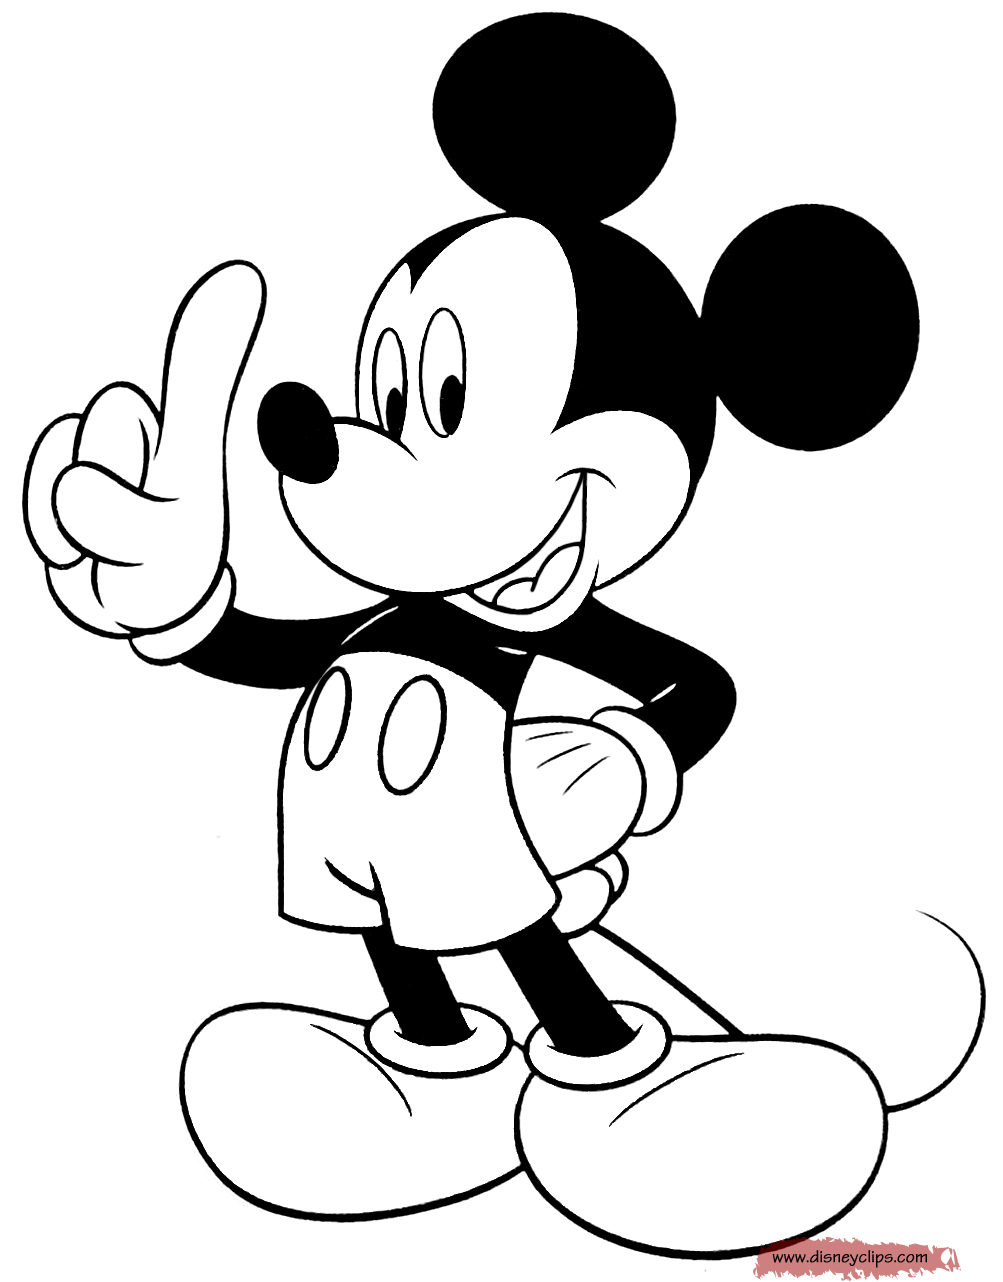 mickey mouse coloring pages mickey mouse coloring pages 2 coloring pages to print pages coloring mouse mickey 